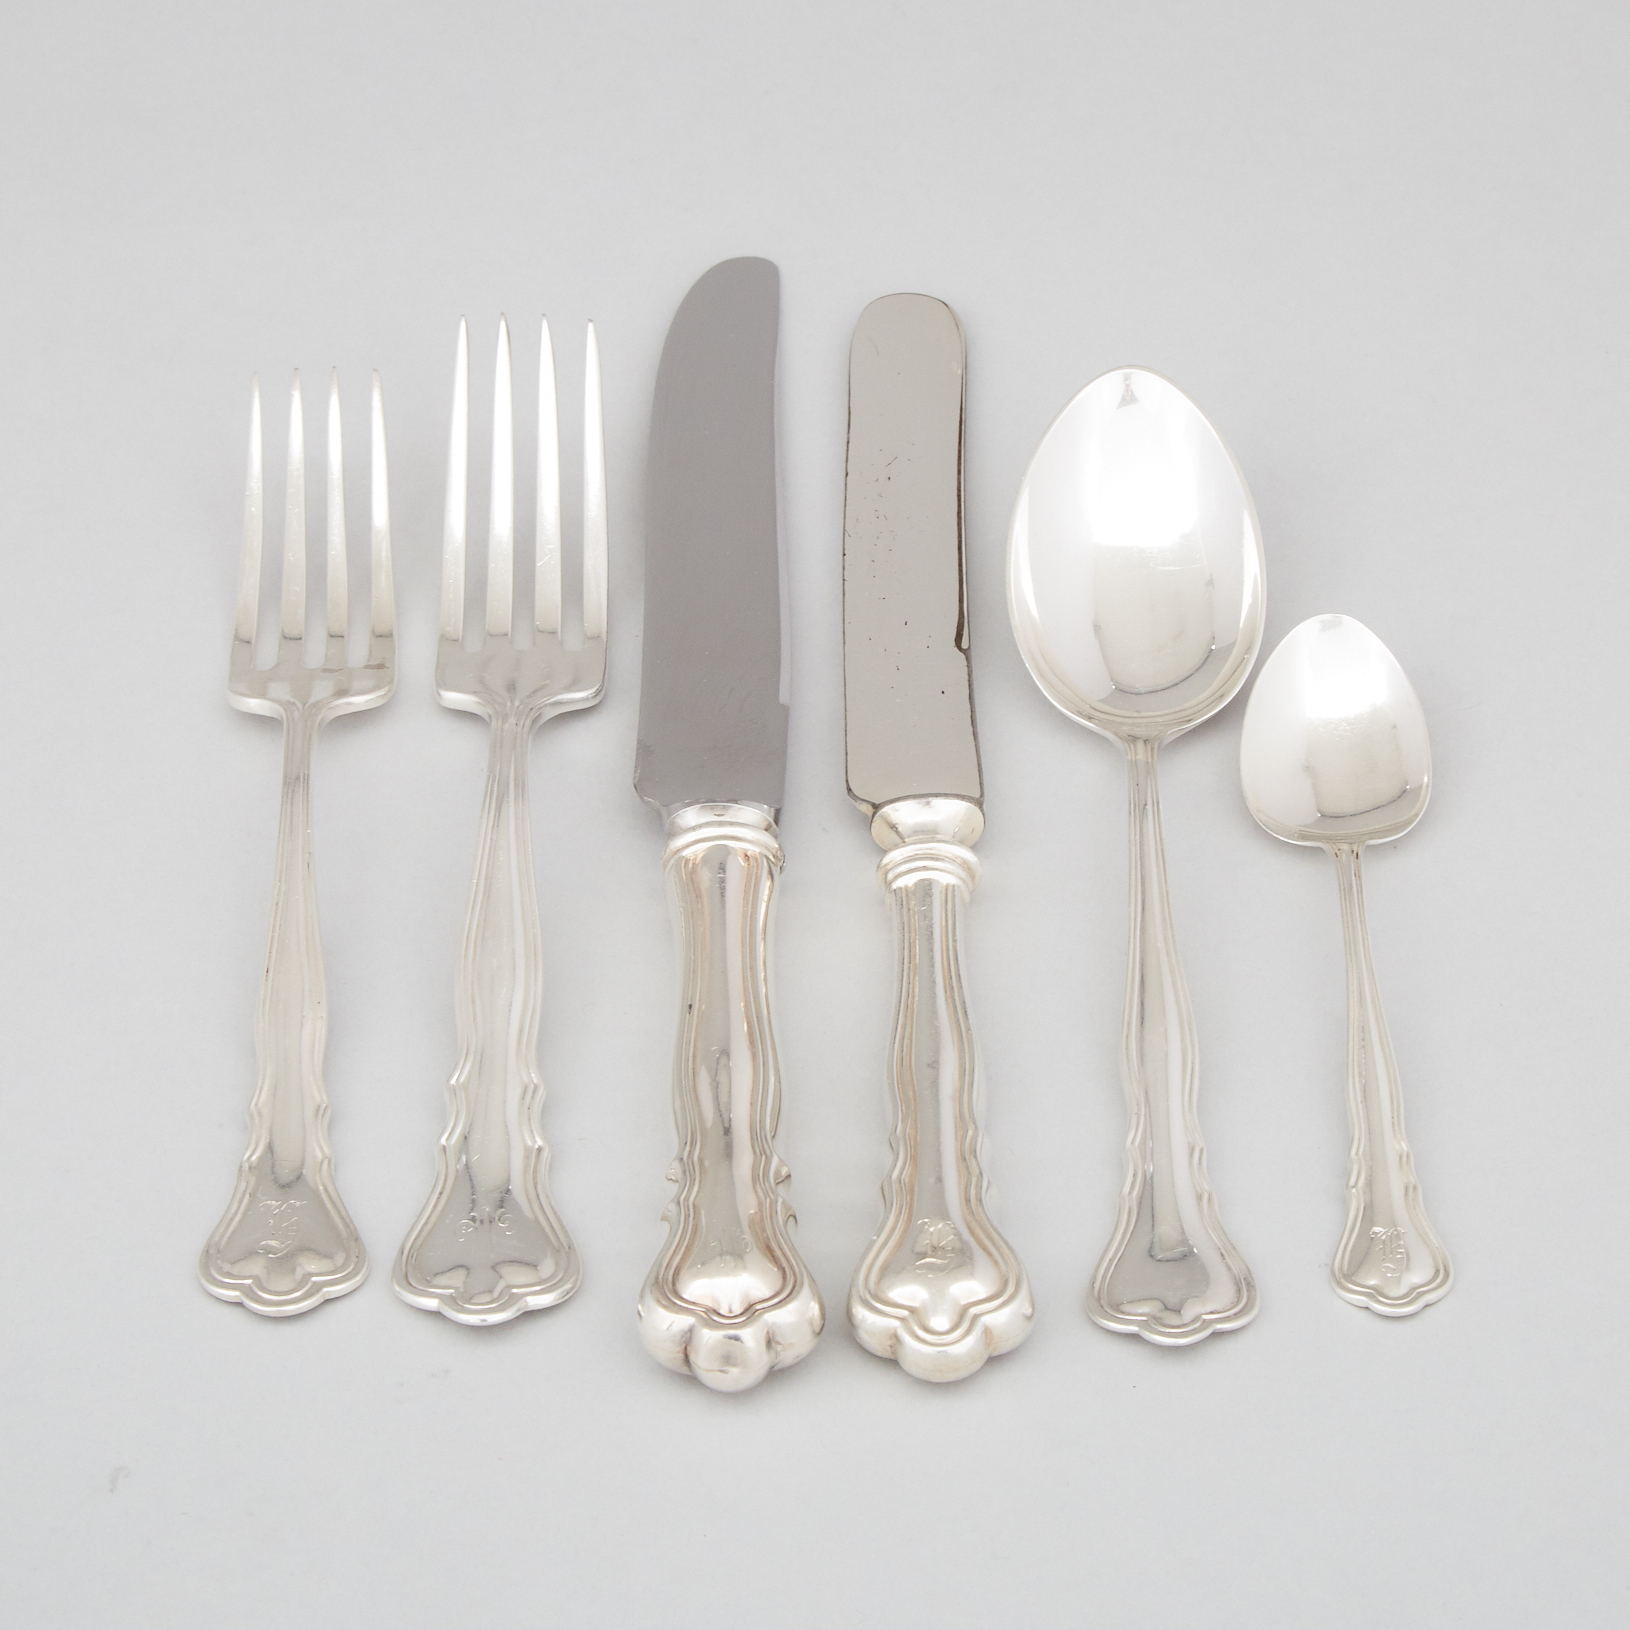 Canadian Silver 'Chippendale' Pattern Flatware Service, P.W. Ellis & Co., Toronto, early 20th century